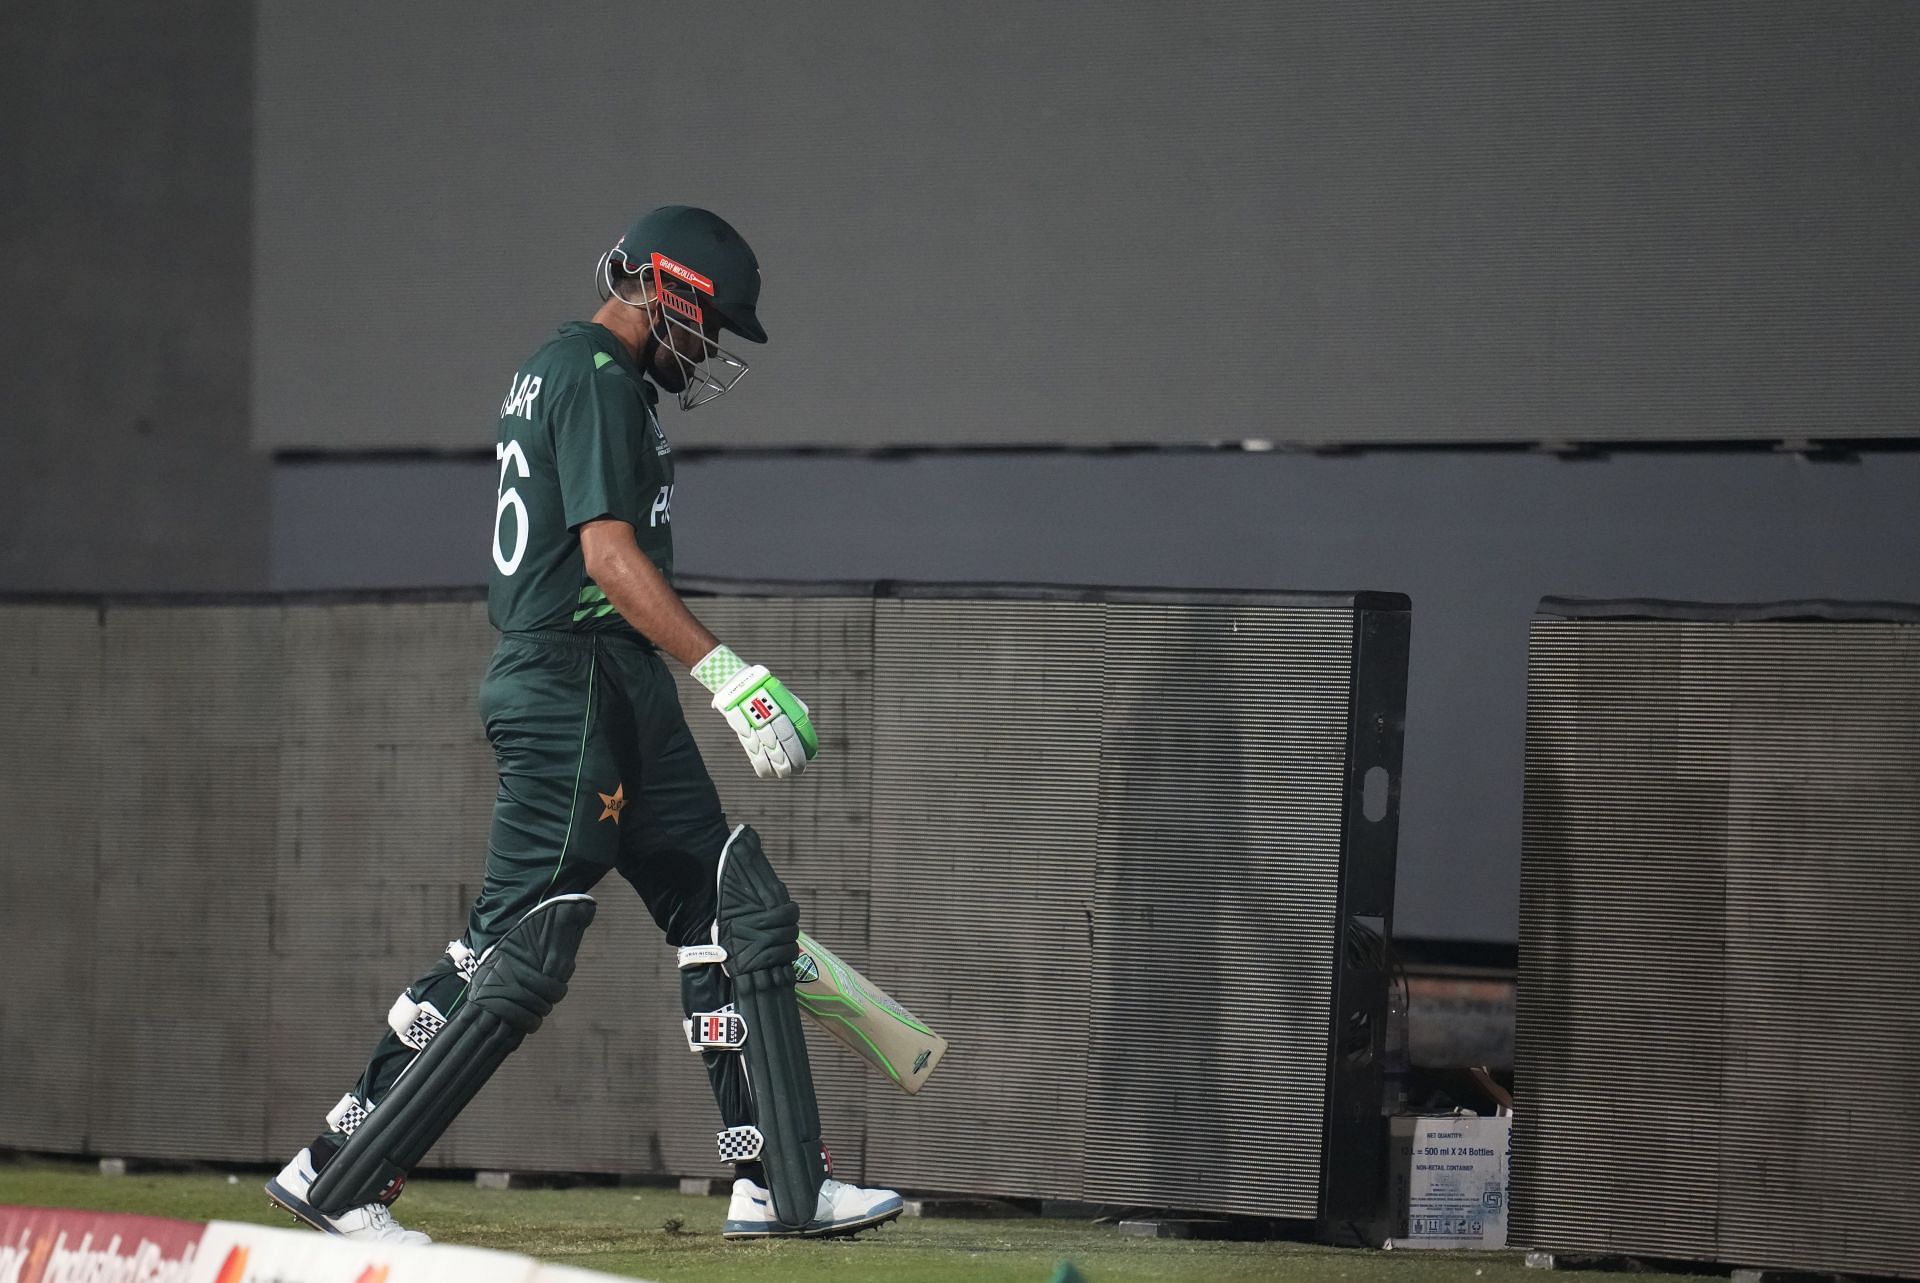 Babar Azam has only one half-century from four games. (Pic: AP)